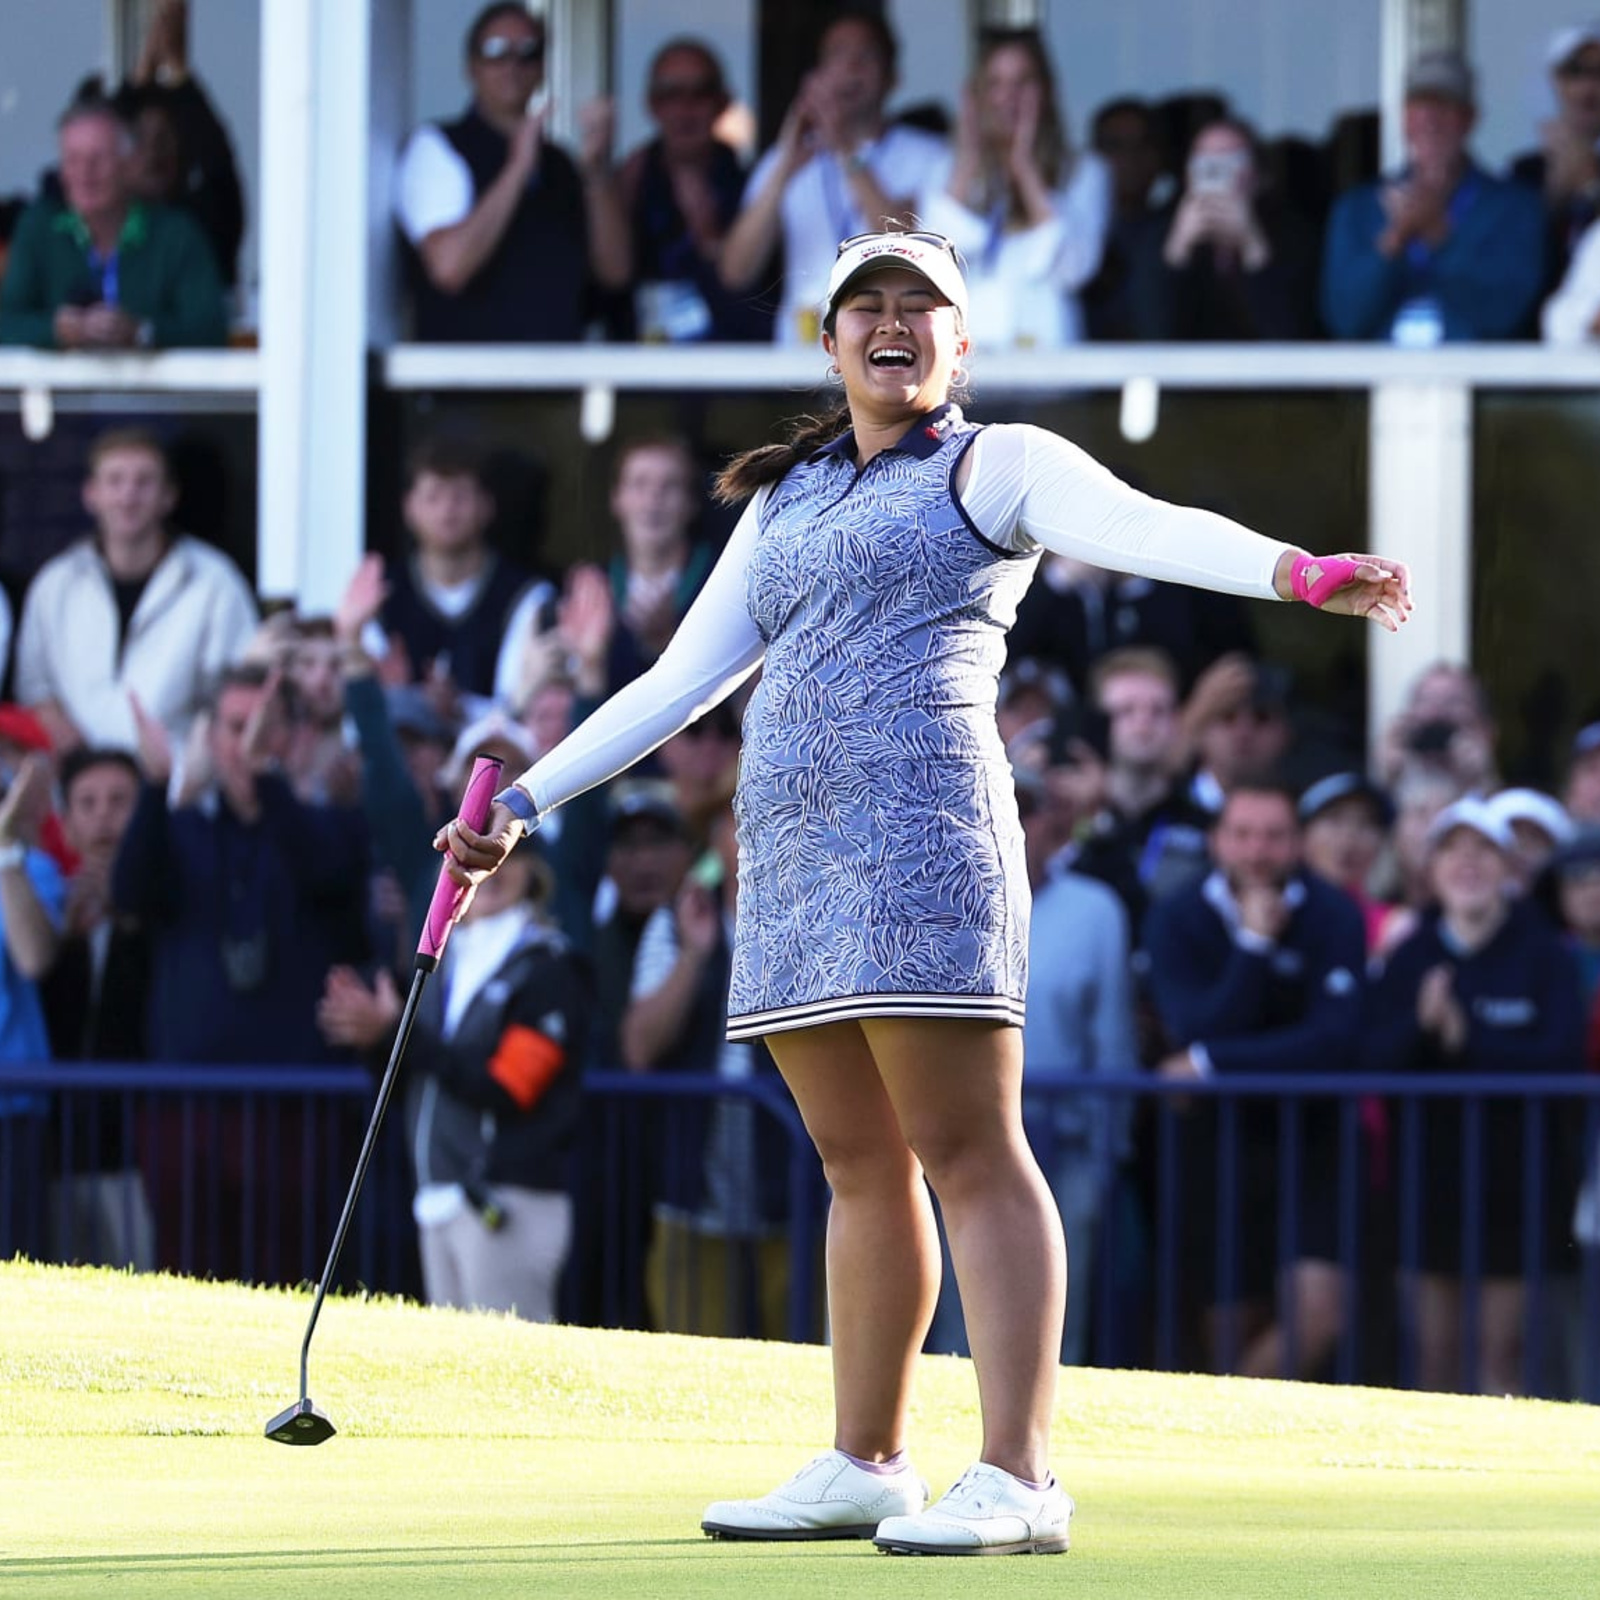 AIG Women's Open 2023: Record prize money payout in full